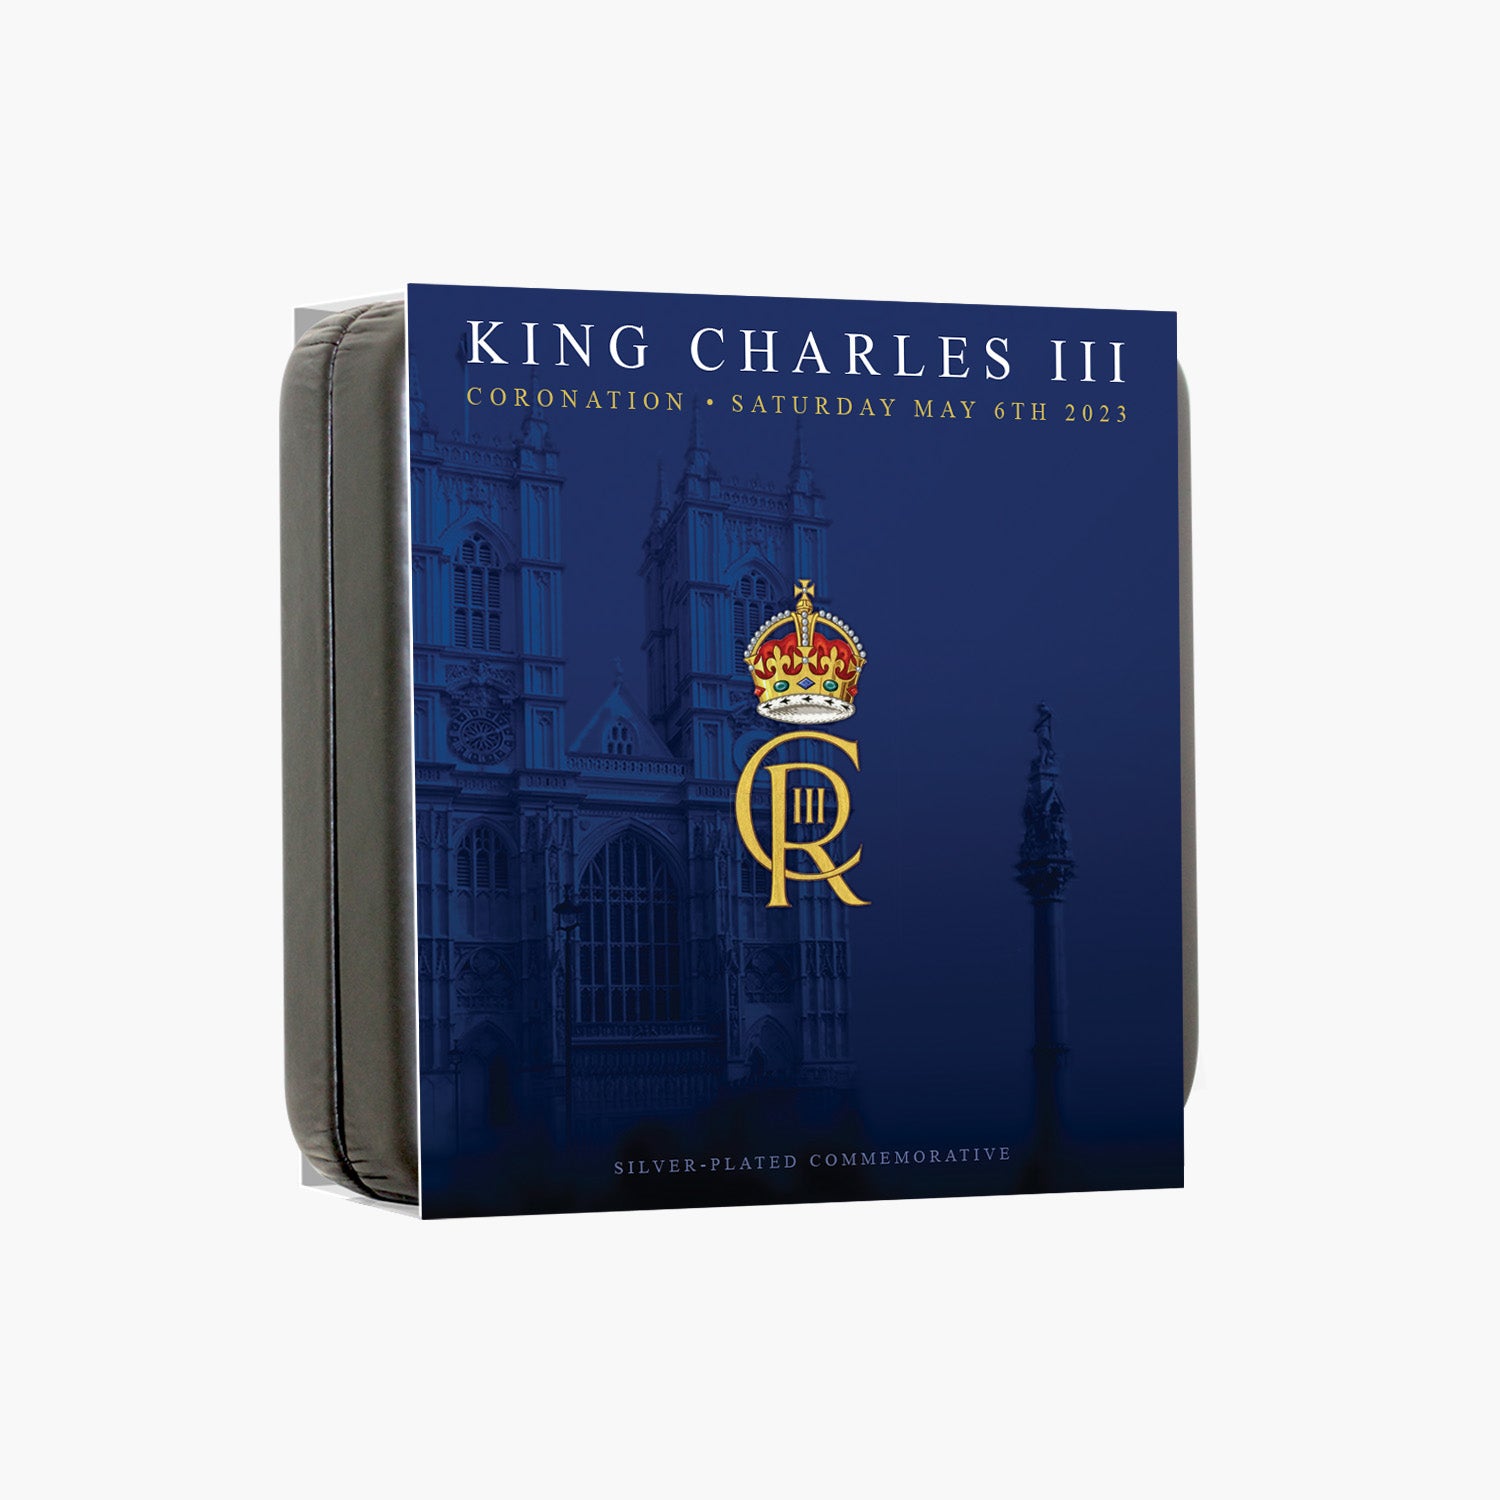 The Official Coronation Portrait of His Majesty King Charles III Premier Edition